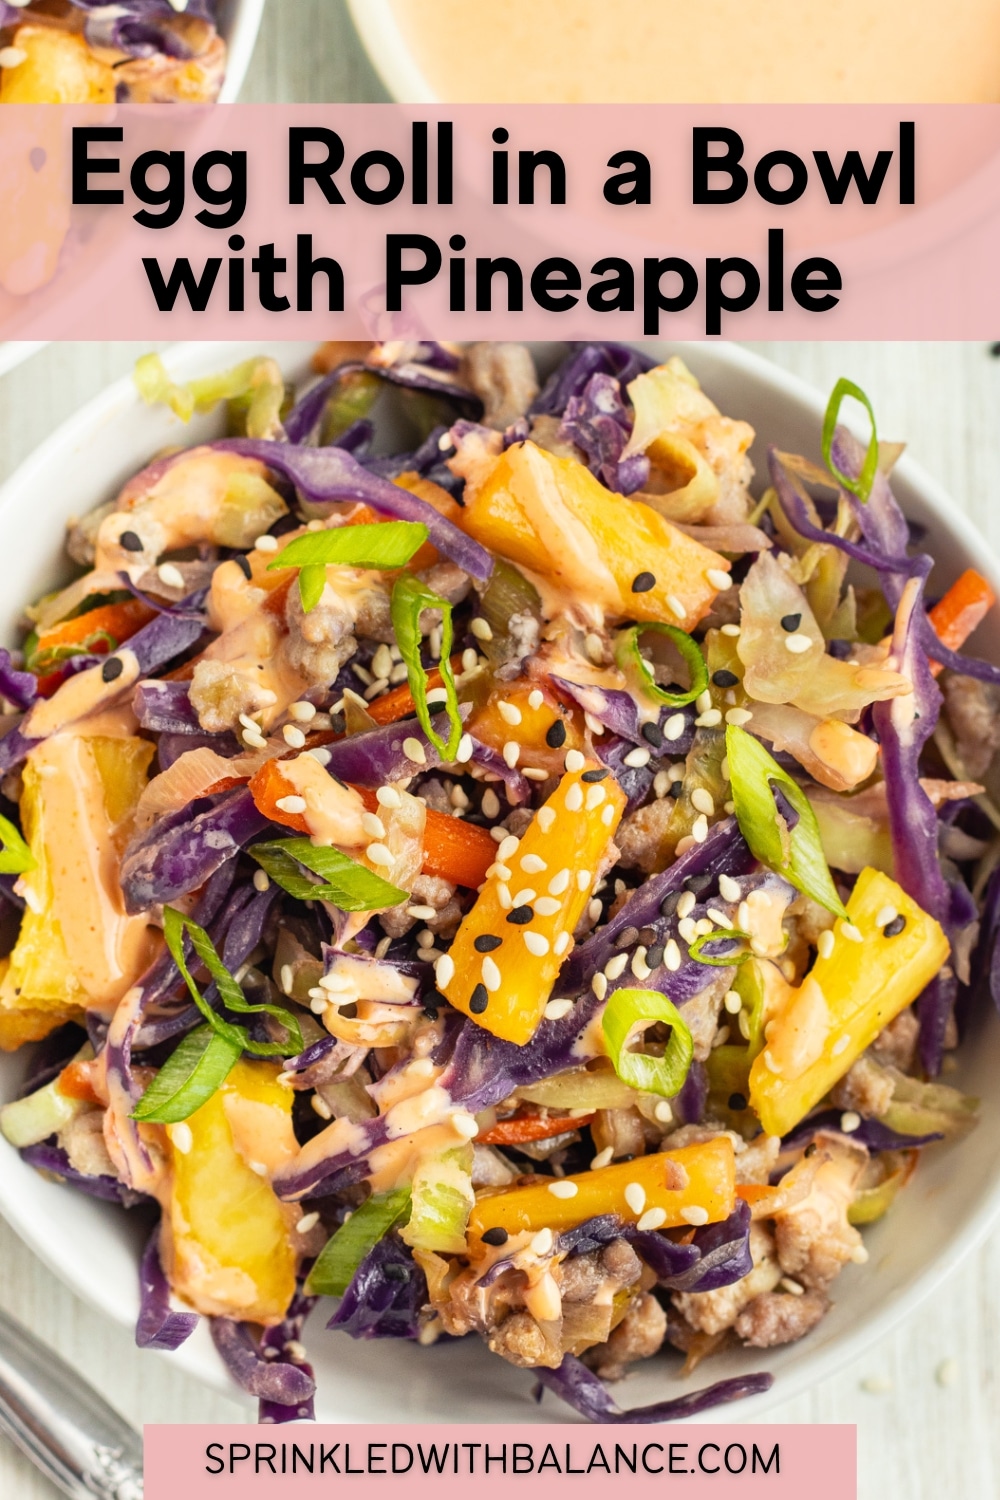 Egg Roll in a Bowl with Pineapple - Sprinkled With Balance